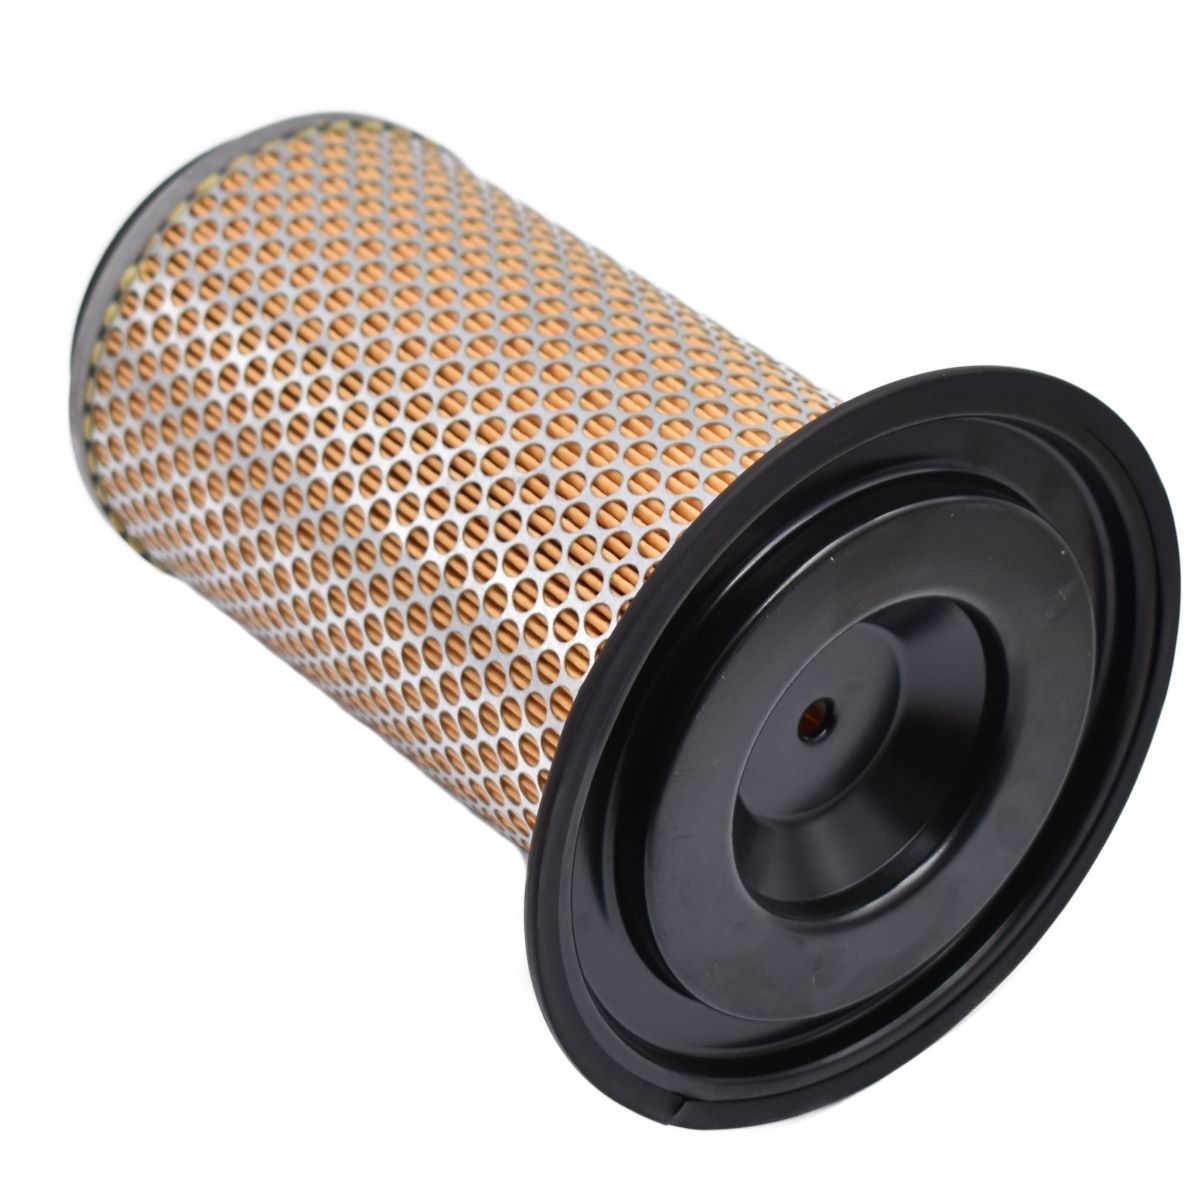 Airfilter TF19 (Sial) Iseki TF: (Sial) TF19 Dimensions: Length: 200mm Dimensions outside: 104mm Diameter inside: 65mm 3656-301-2130-0 3656-301-213-00 365630121300